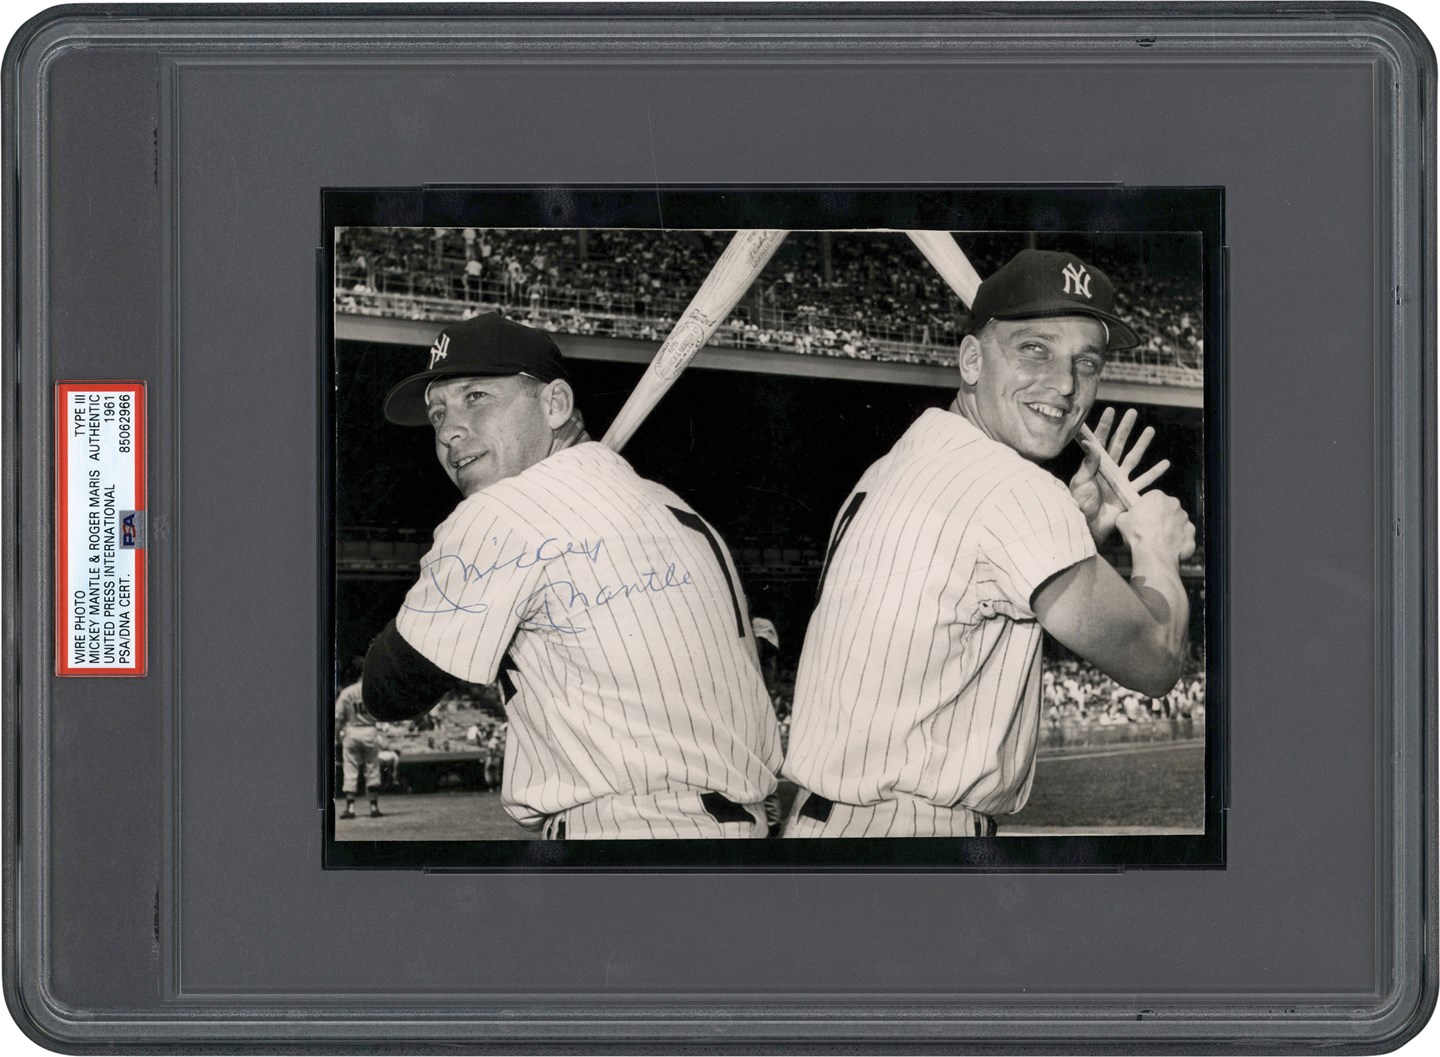 Baseball Autographs - 1961 Mickey Mantle & Roger Maris Original Photograph - Signed by Mantle (PSA)